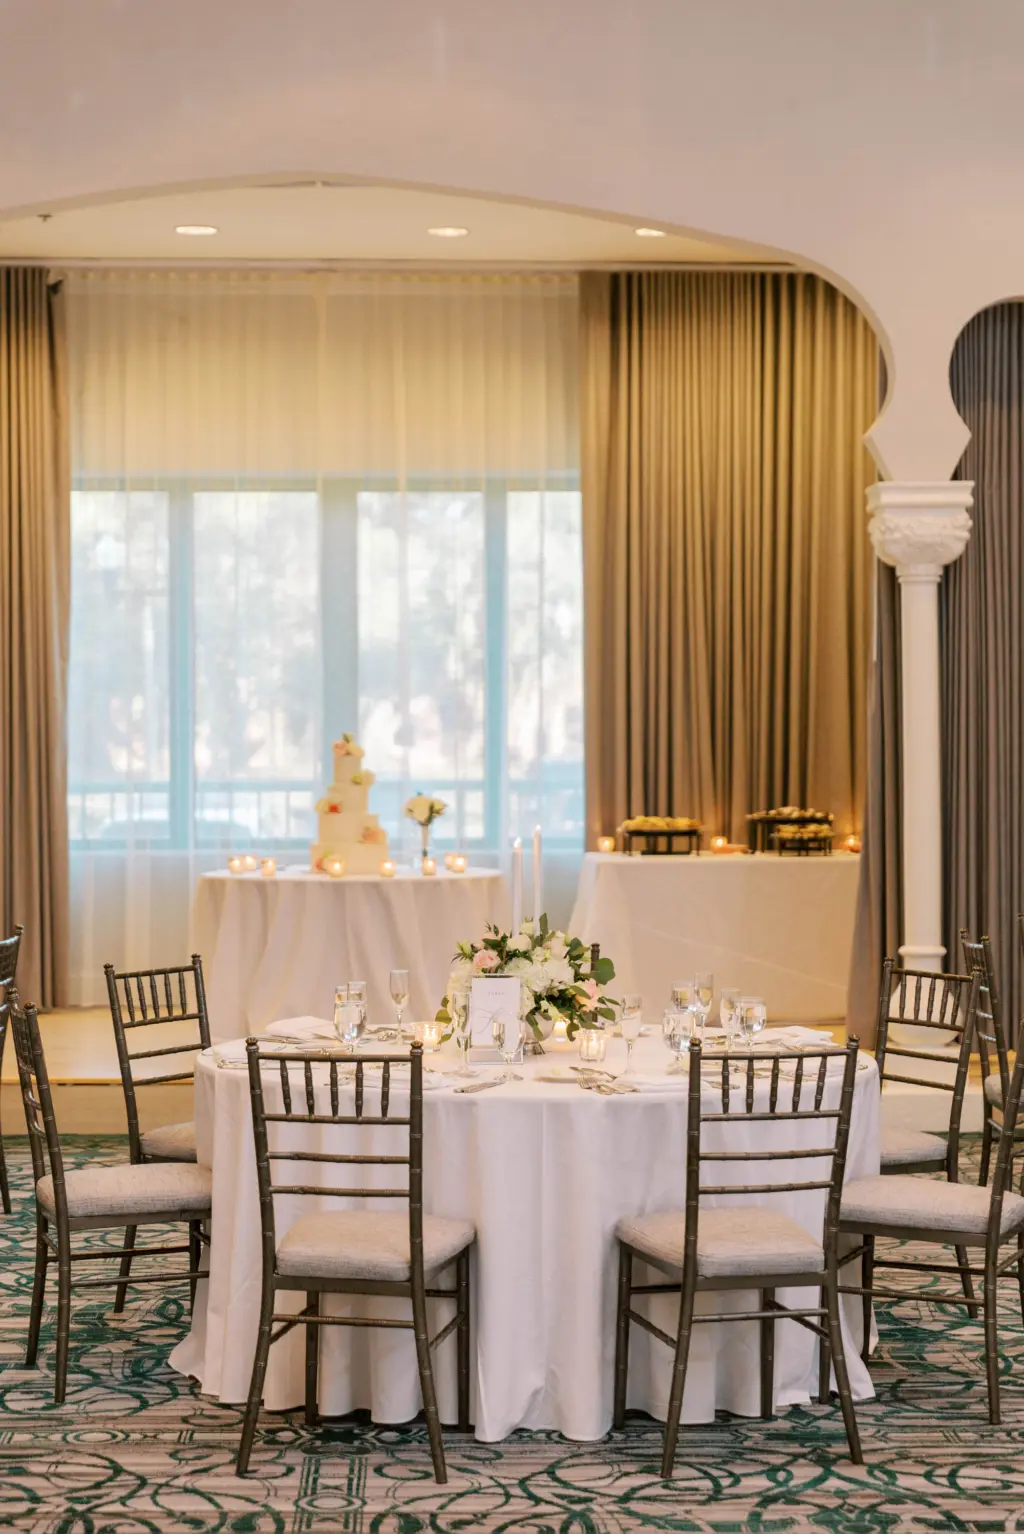 Round Tablescape White Linens with Black Chiavari Chairs and Elegant White Centerpieces with Greenery Inspiration